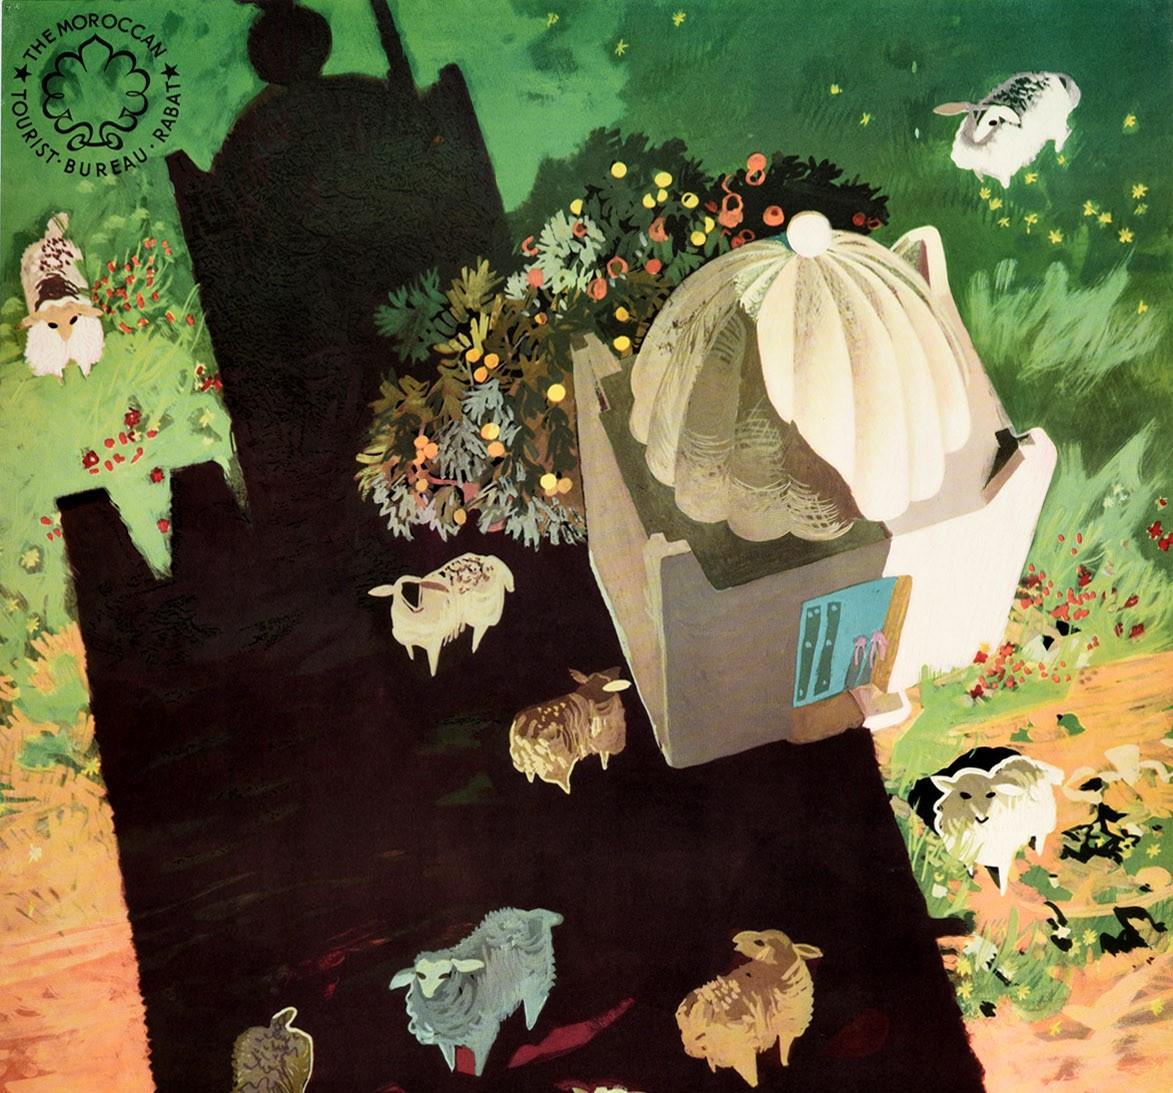 Original Vintage Travel Poster For Morocco Africa Shepherd & Sheep Shadow Design - Print by Delval